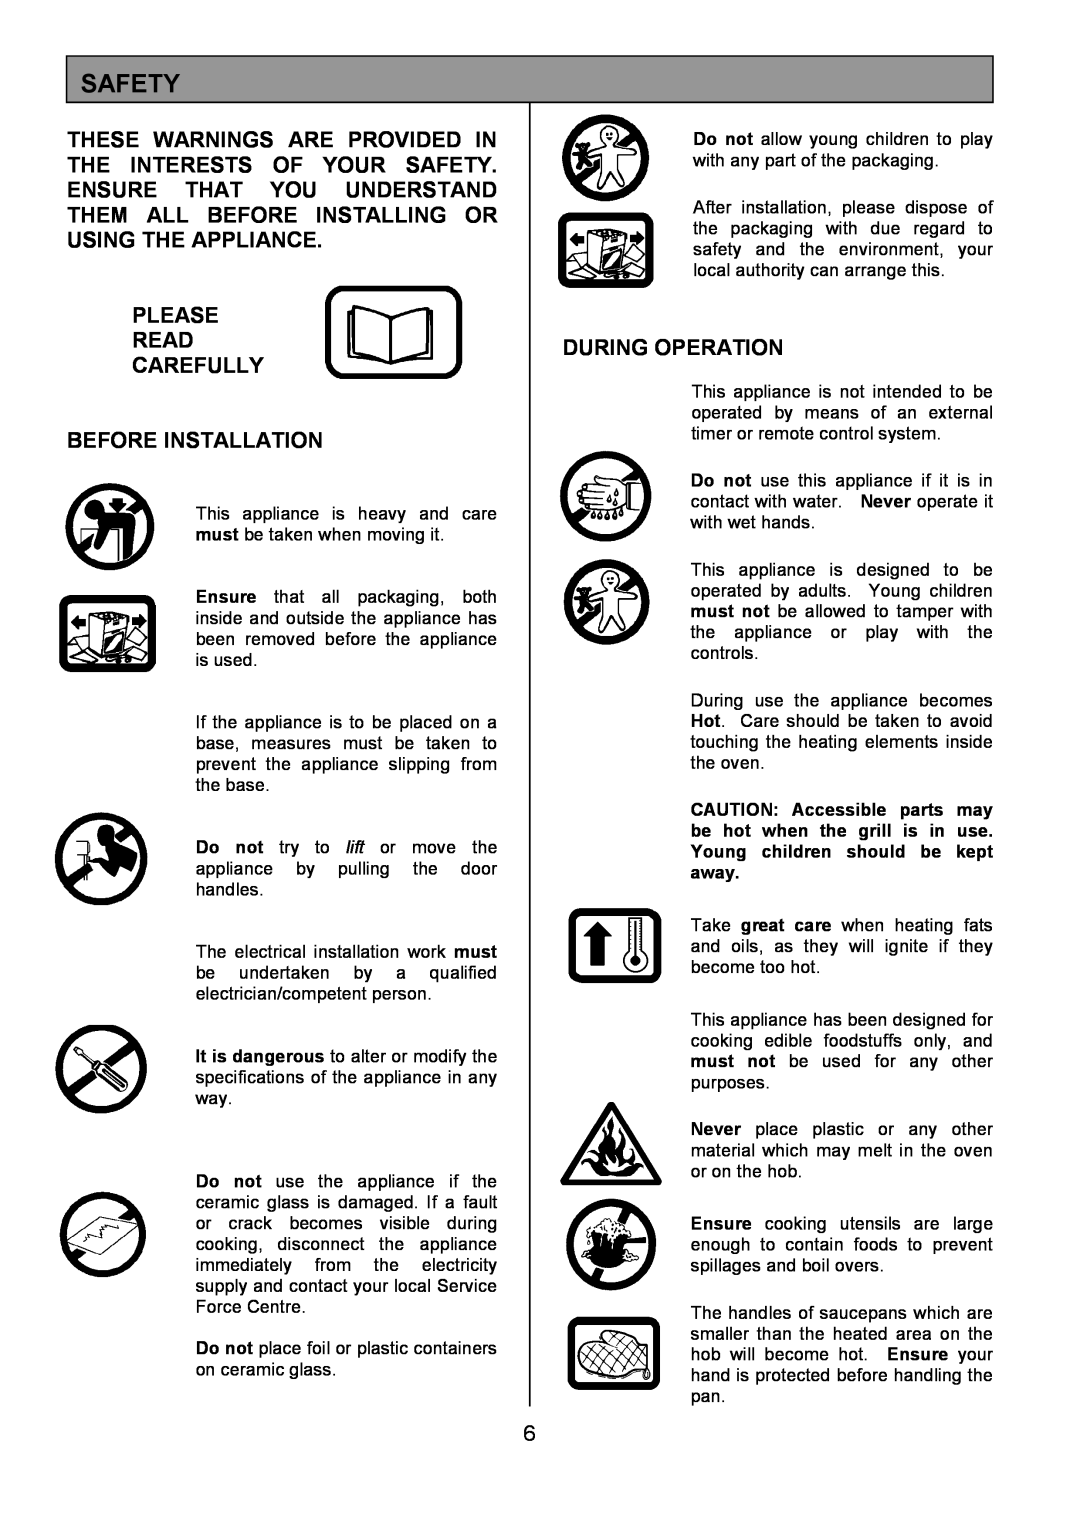 Tricity Bendix SE505 installation instructions Safety, Please Read Carefully Before Installation, During Operation 